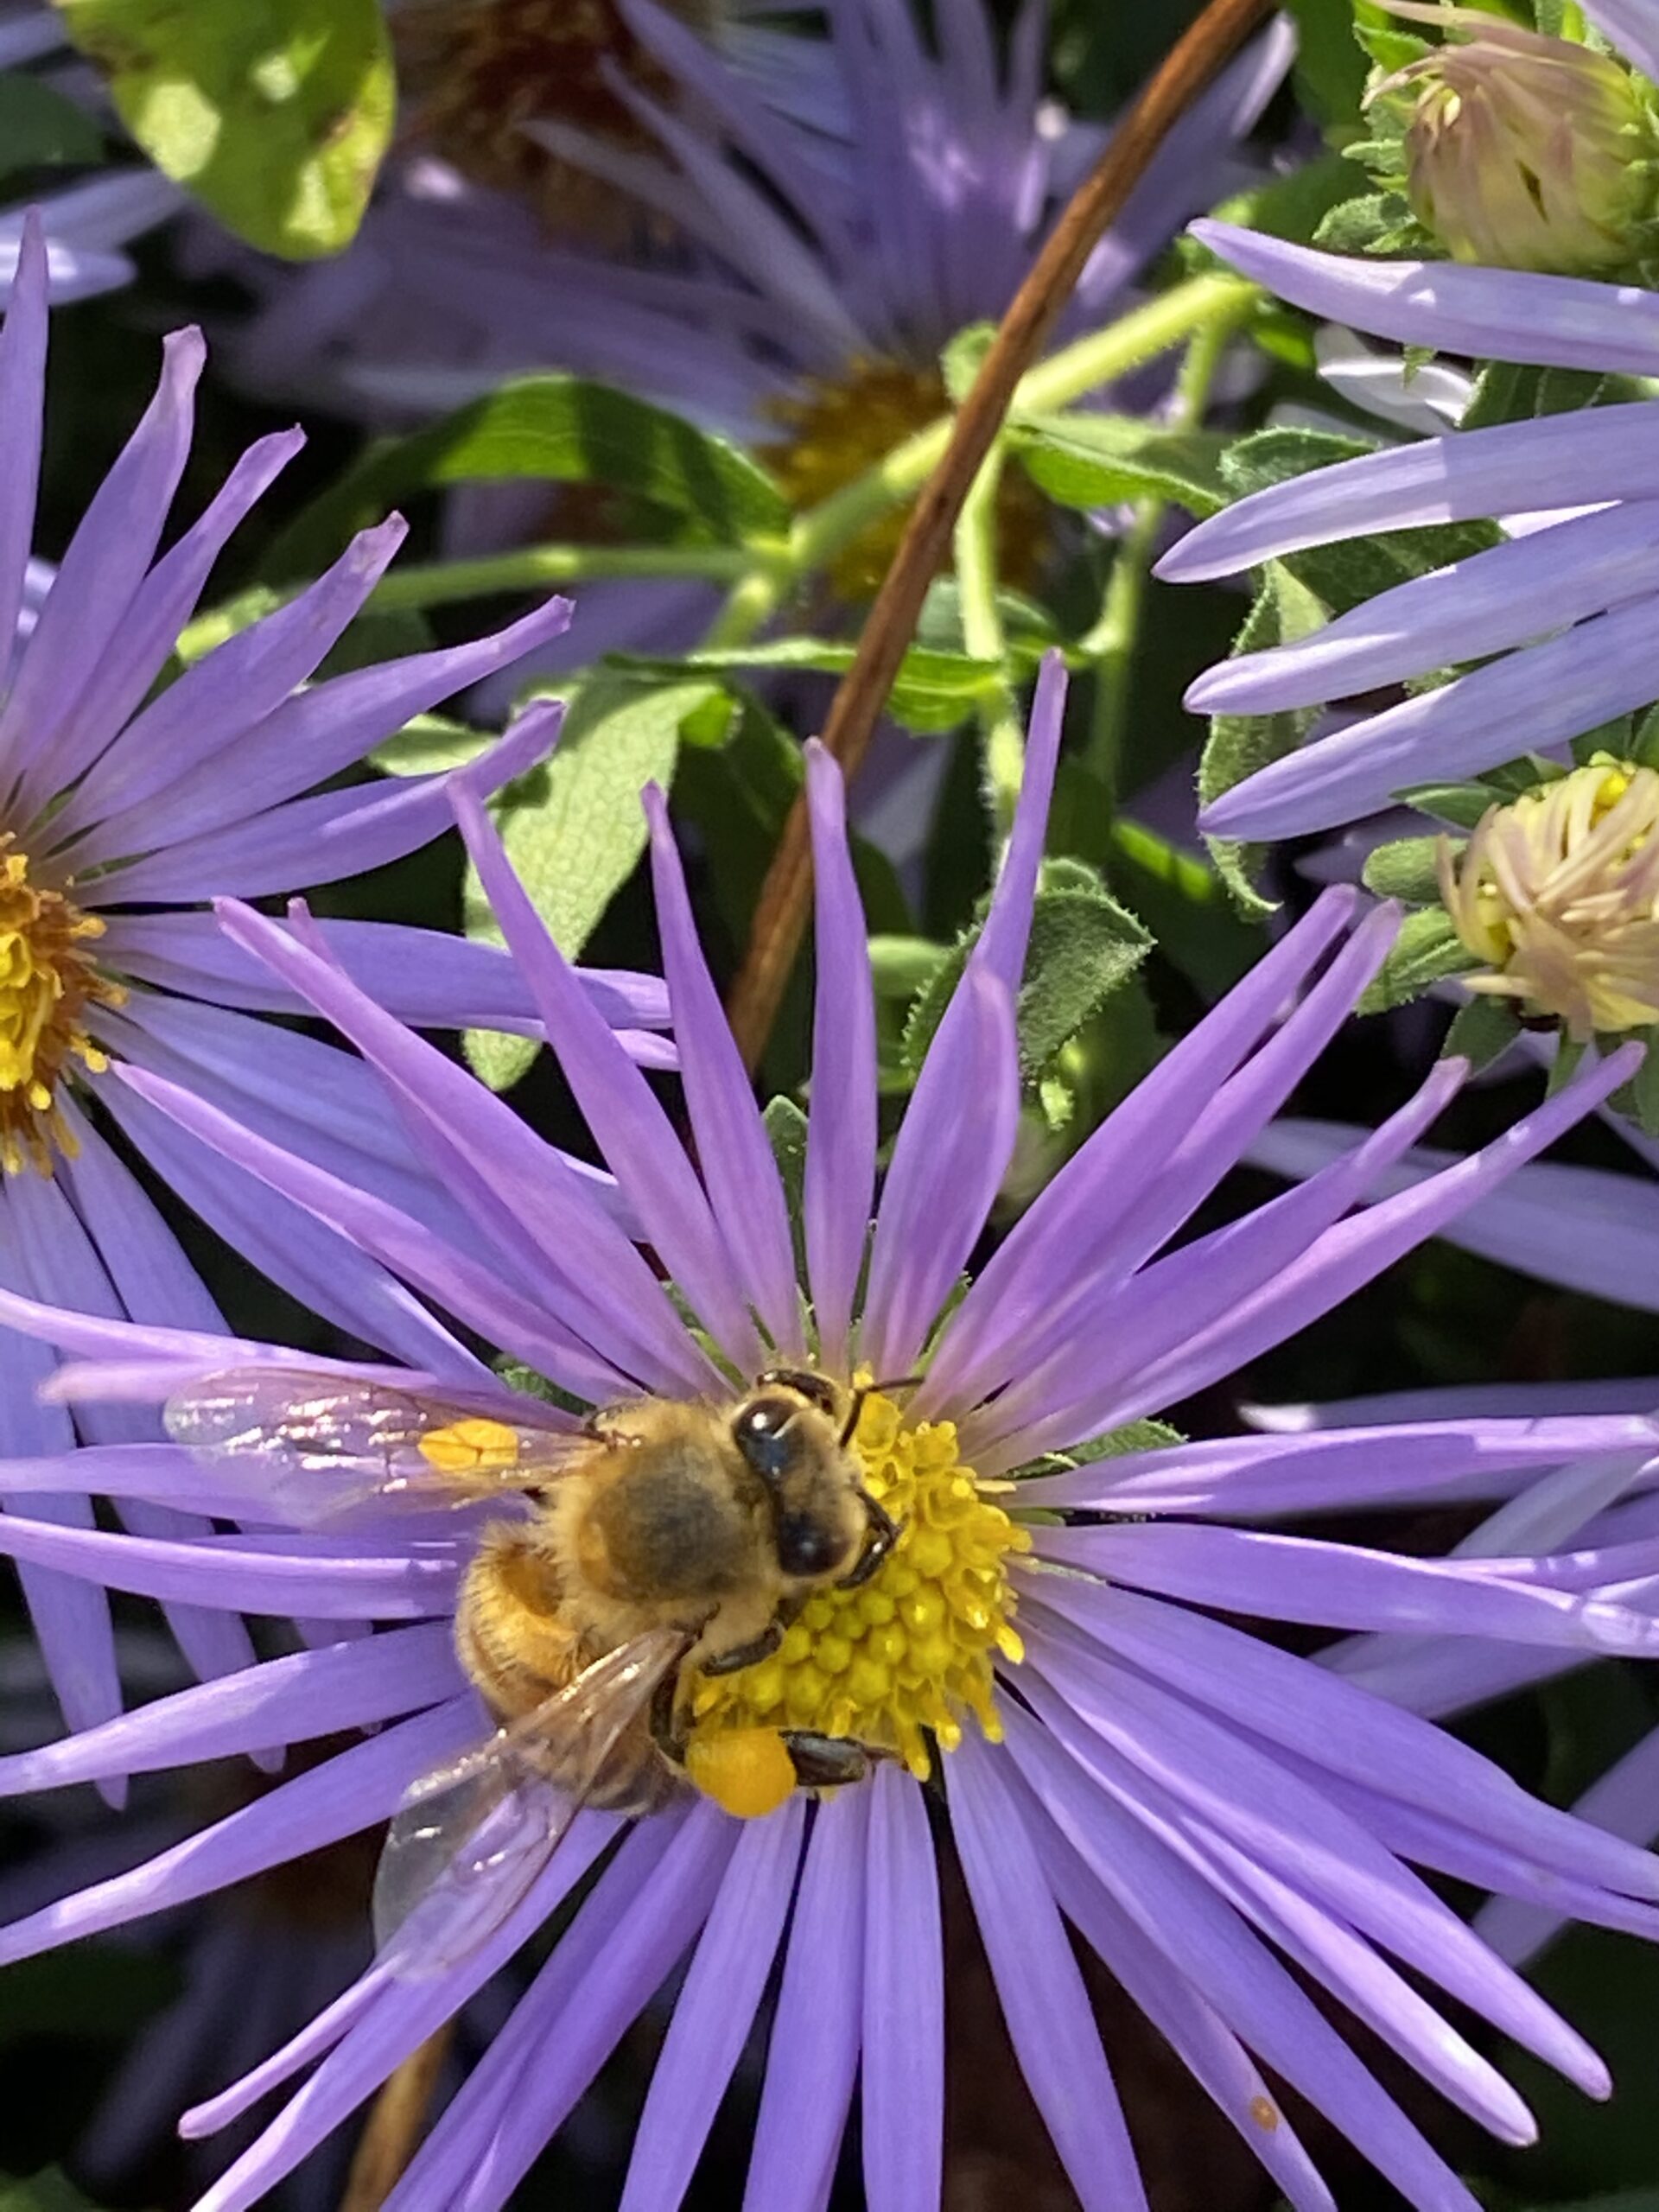 A bee visiting a purple aster flower.